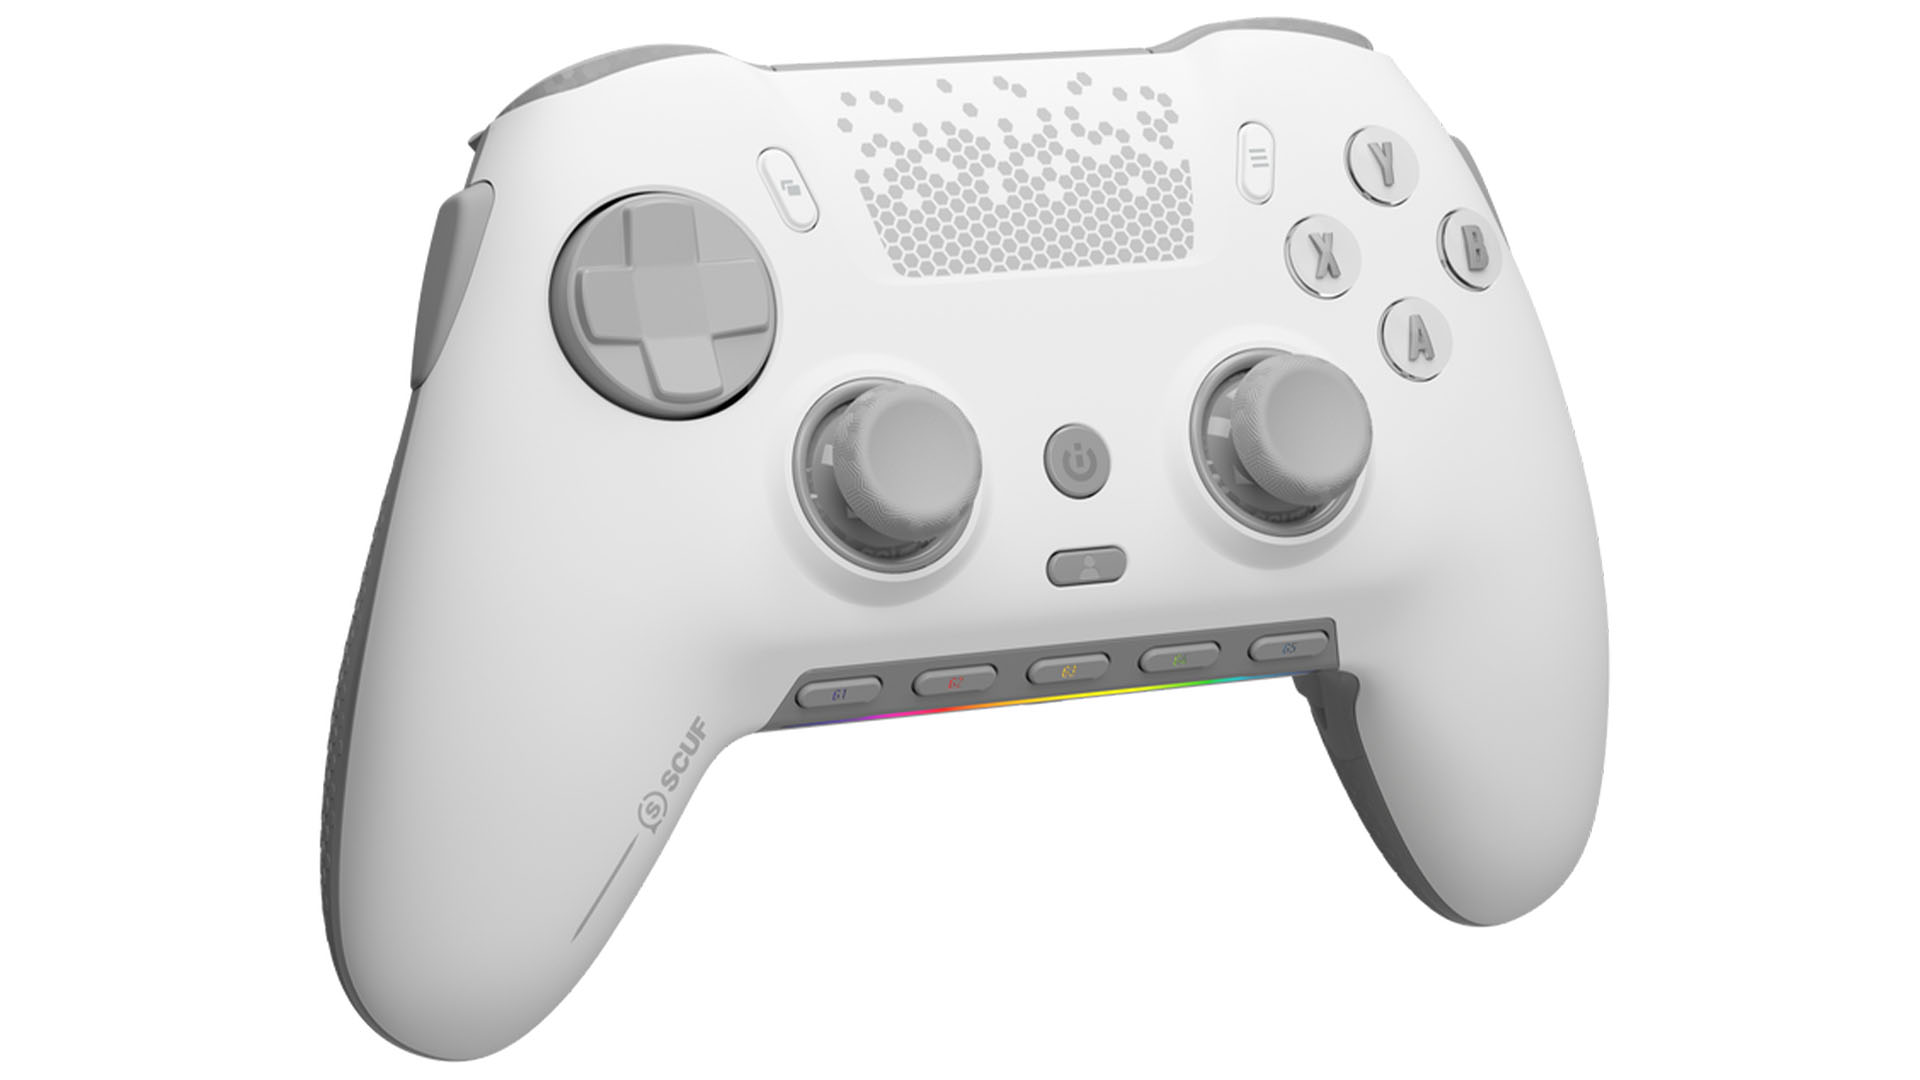 New Scuf Envision controller ditches Xbox and PS5 for pure PC use